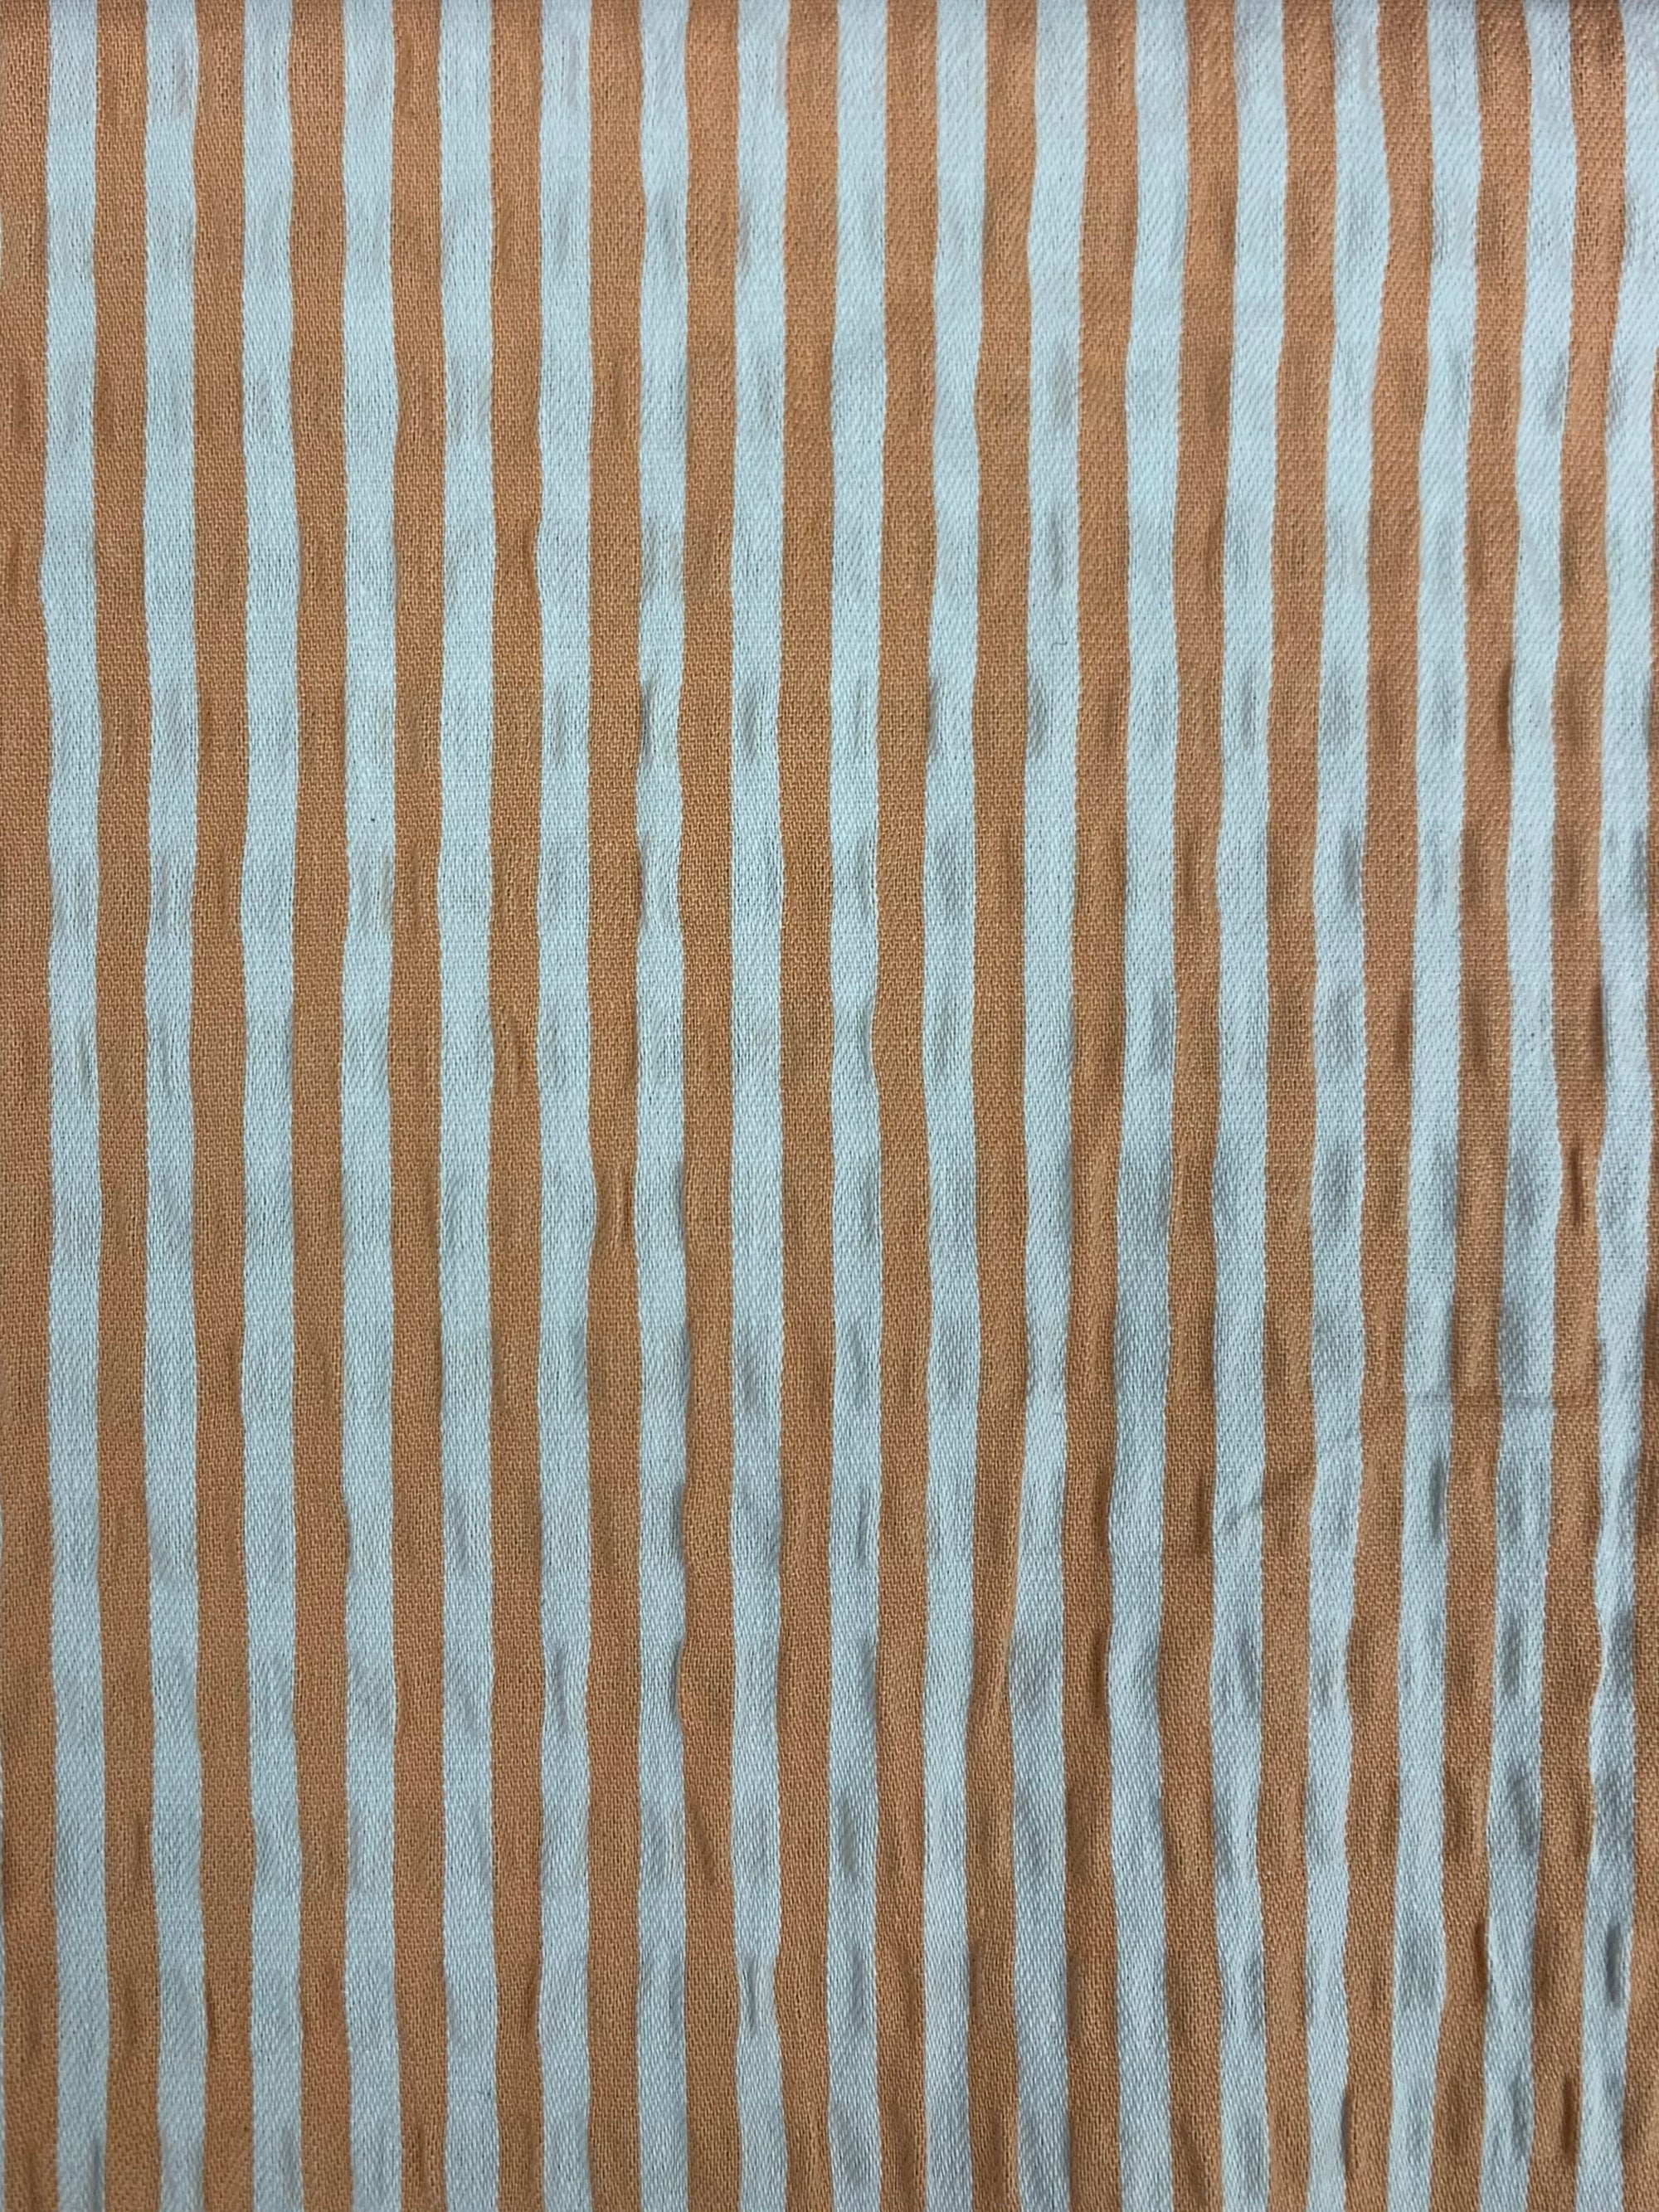 A close up of cotton seersucker fabric in a vertical striped Orange and White